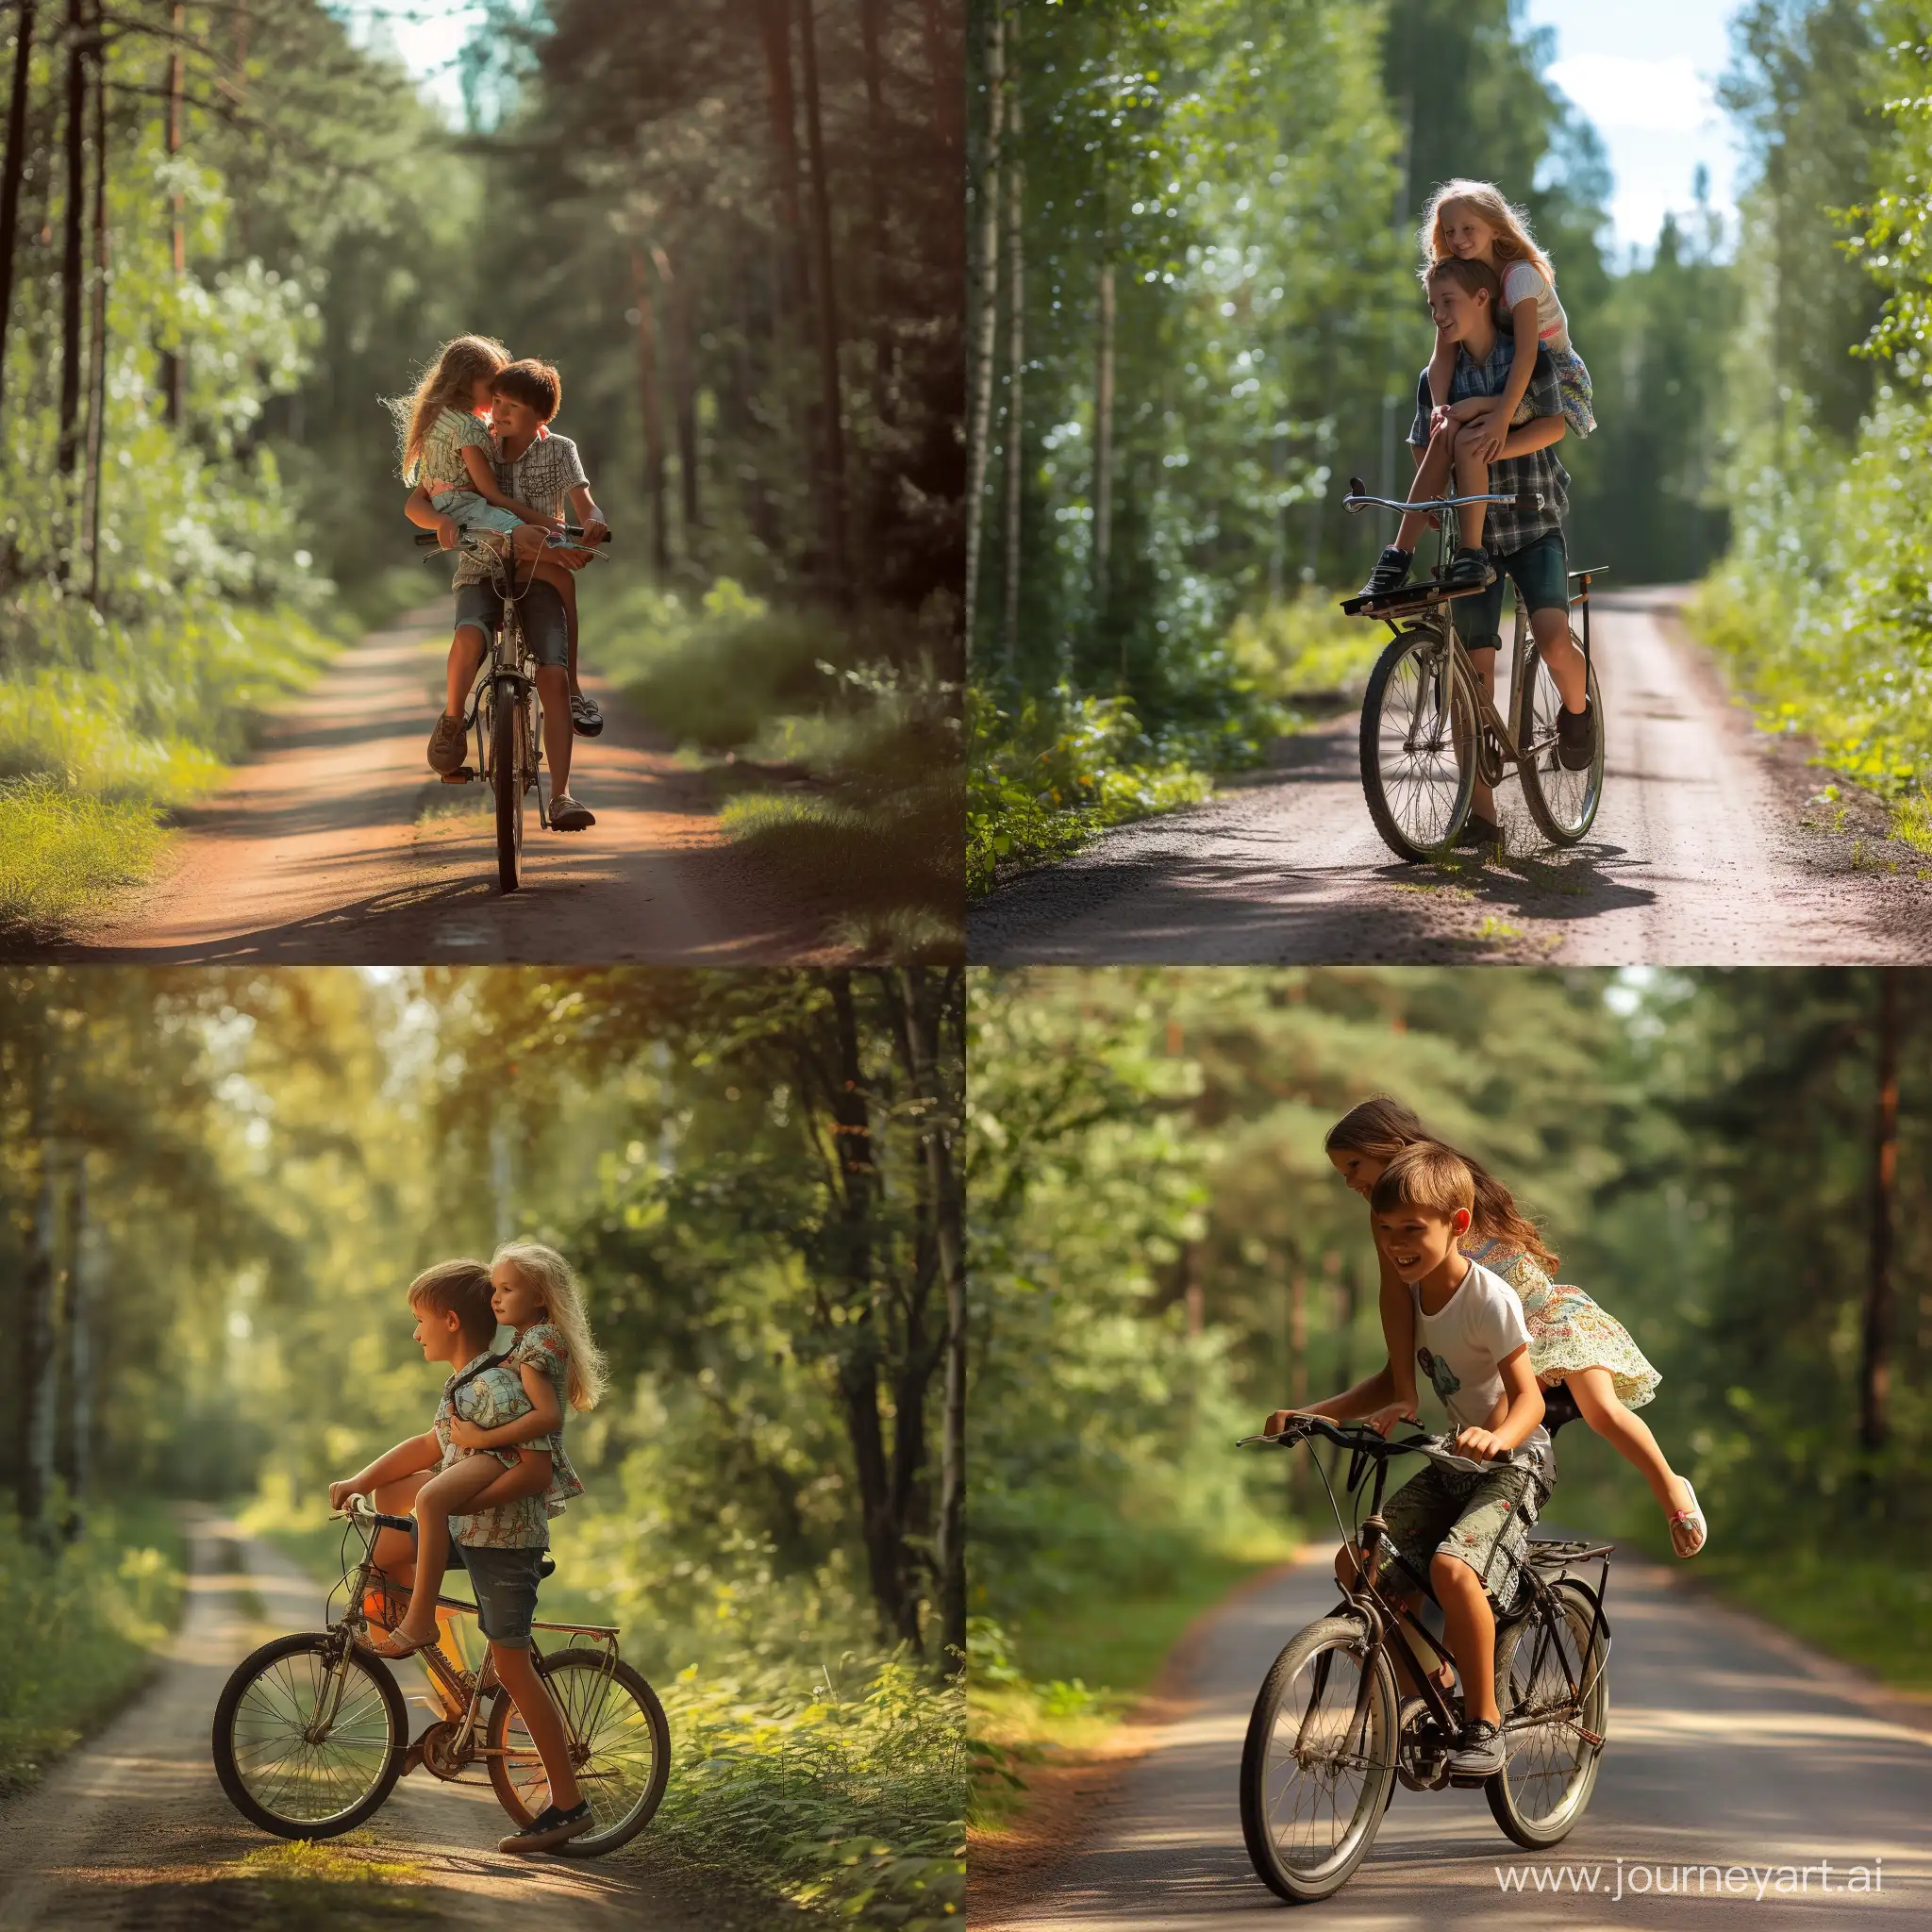 Cheerful-Bicycle-Ride-Boy-Carrying-Girl-through-Sunny-Forest